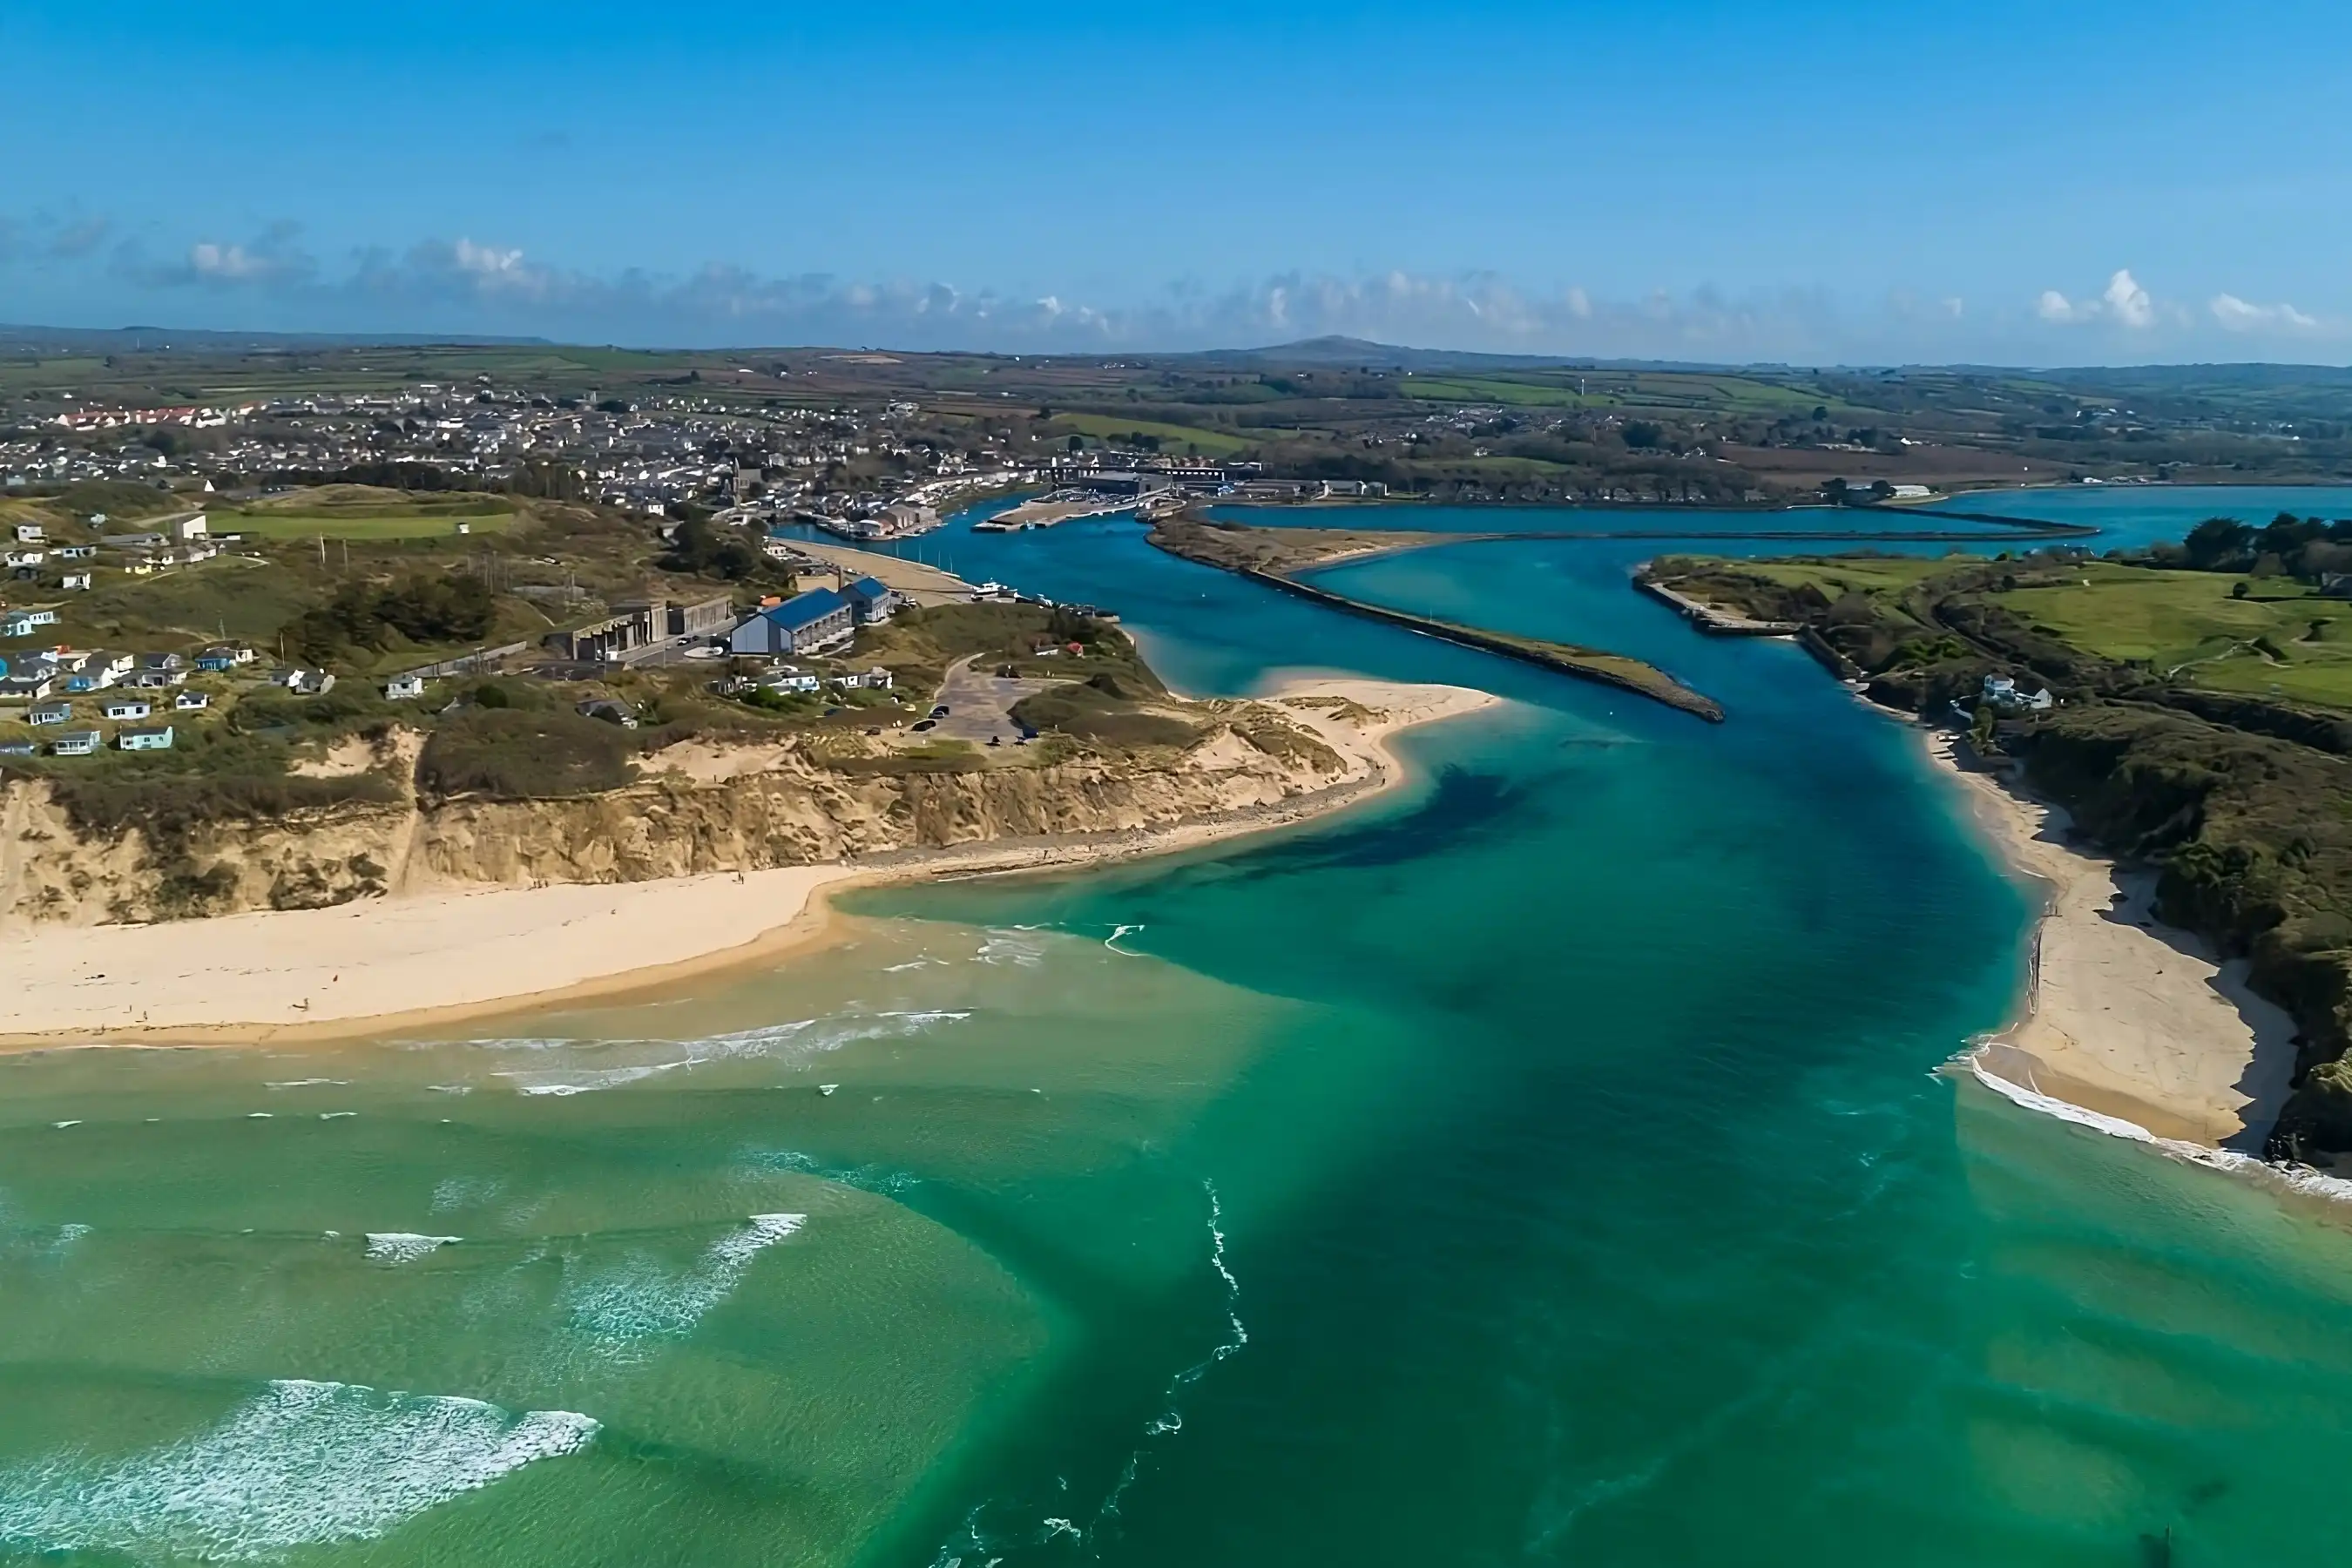 A beautiful shot of Hayle beach. Only the start of three miles of golden sand